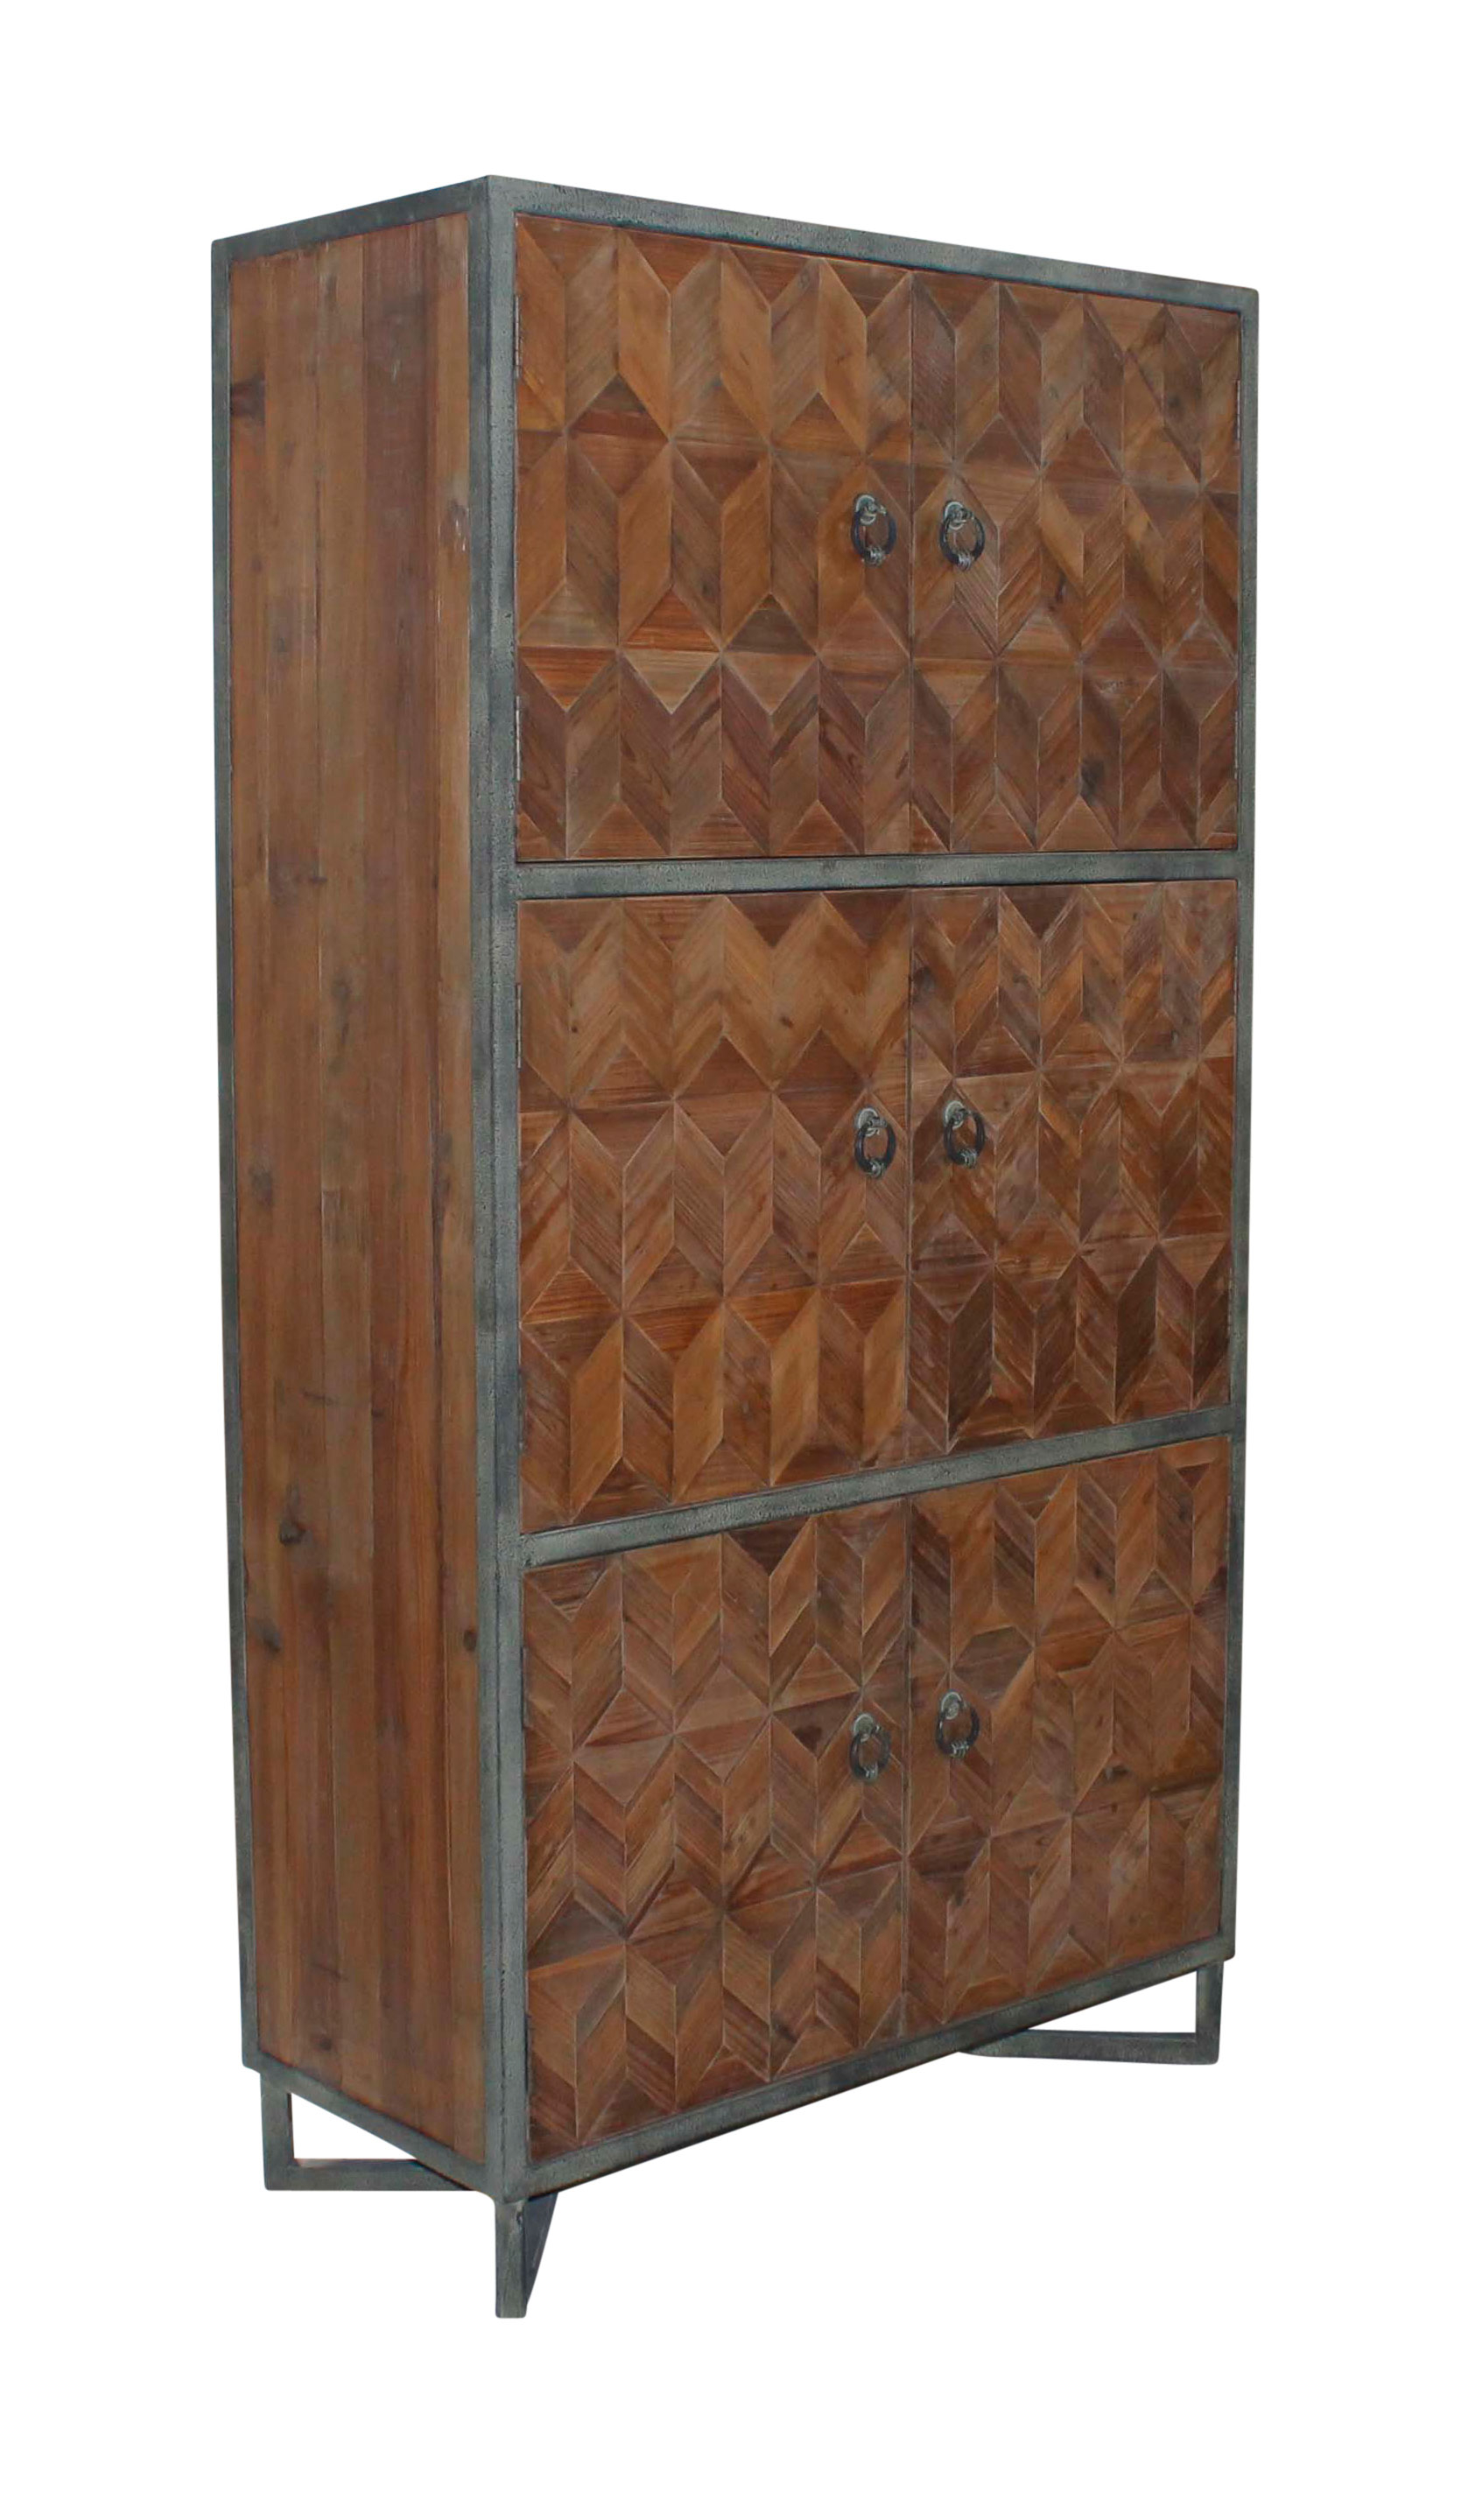 Block & Chisel 6 door recycled pine cabinet with iron frame